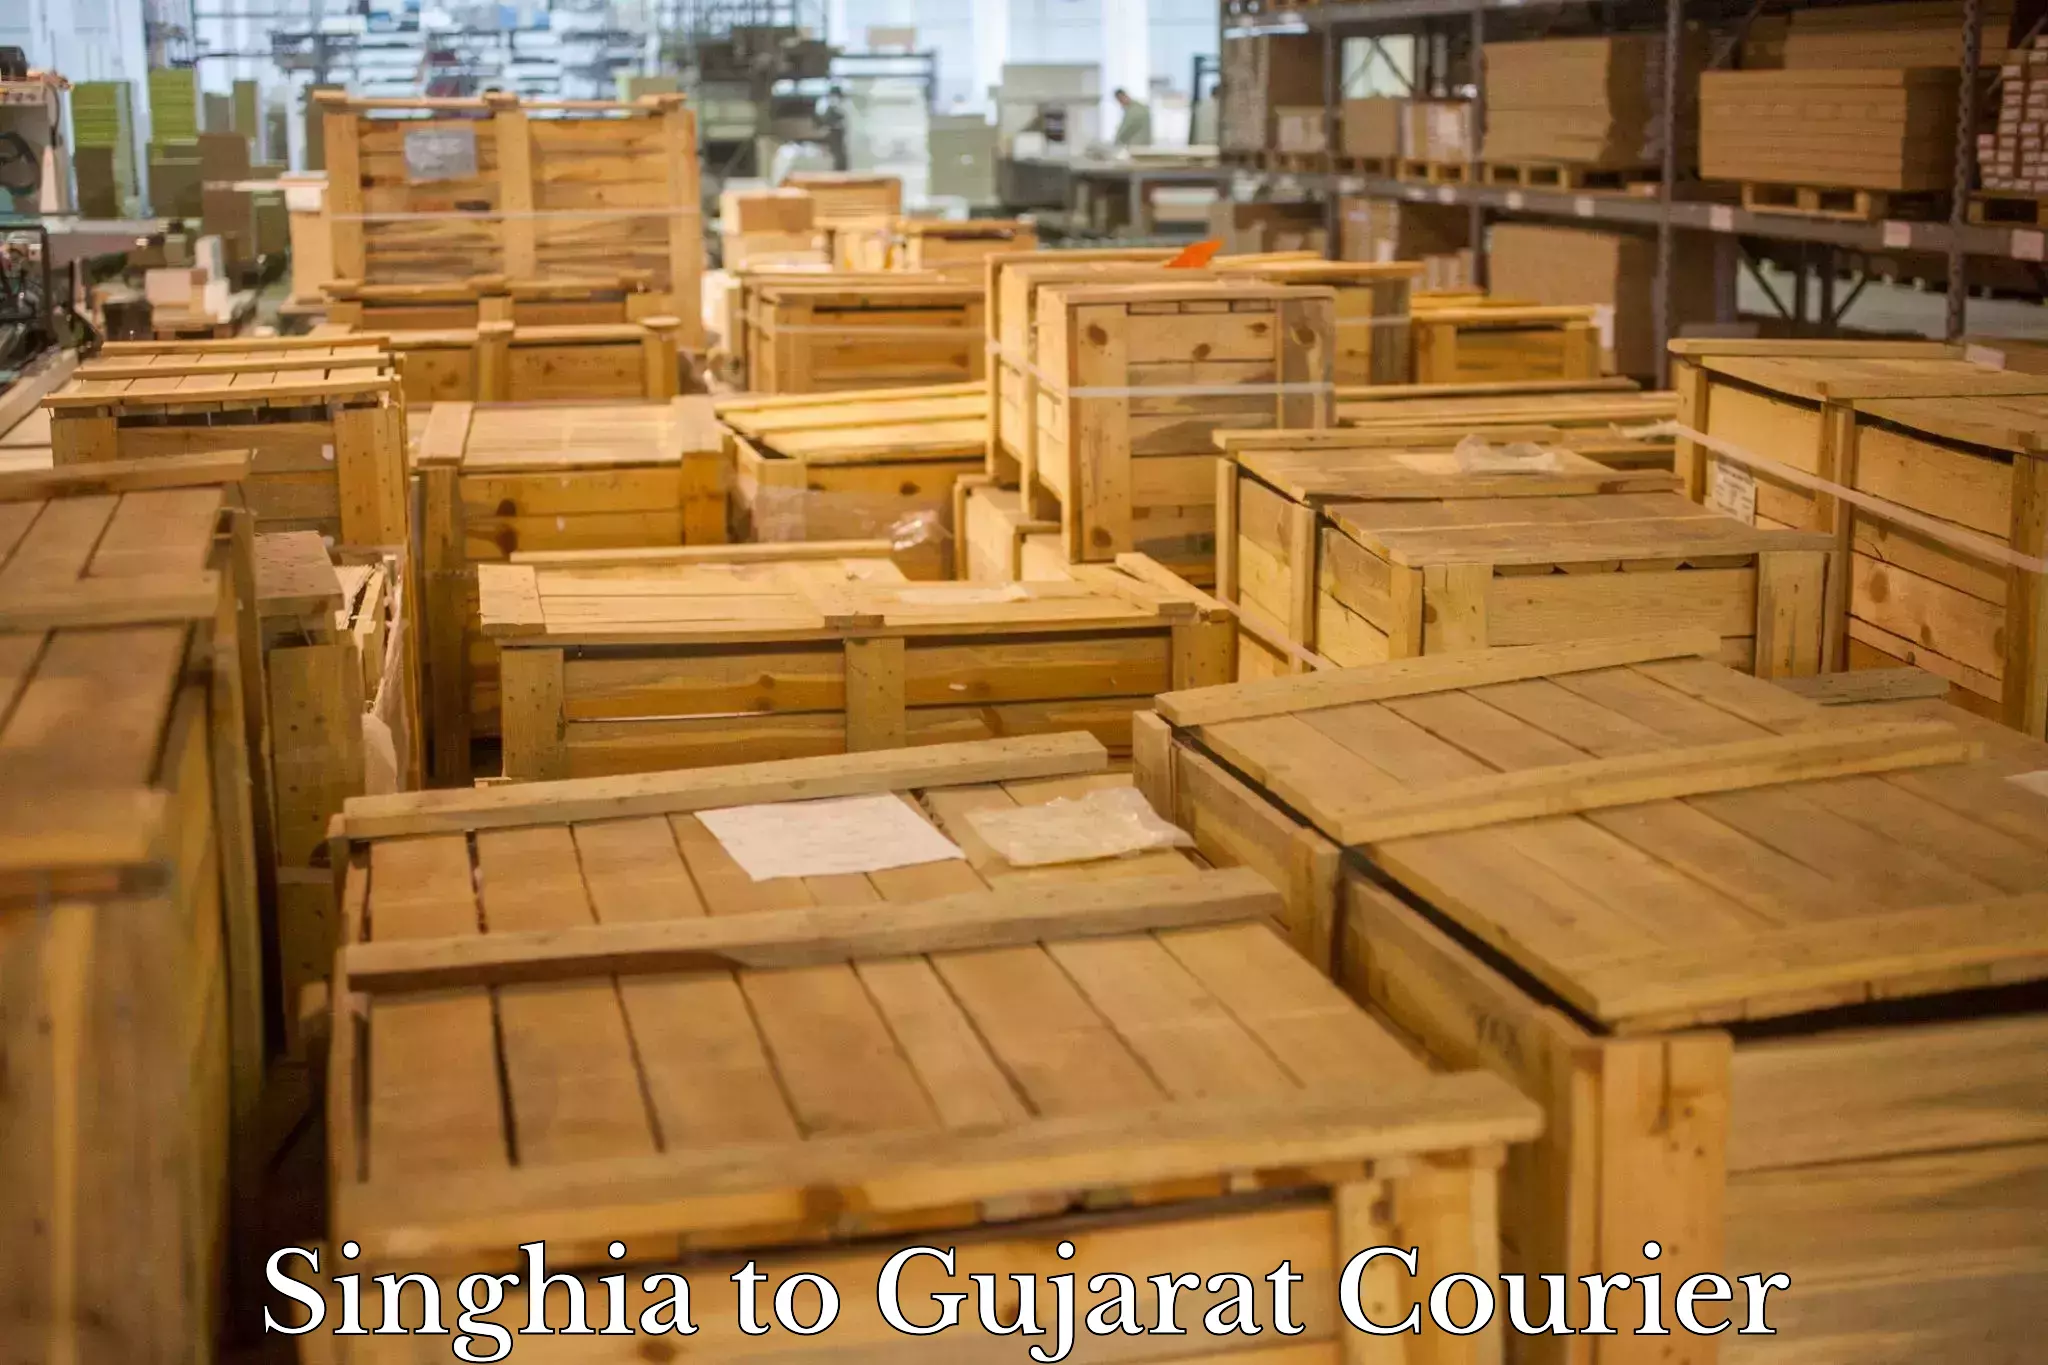 Global shipping solutions Singhia to Ankleshwar